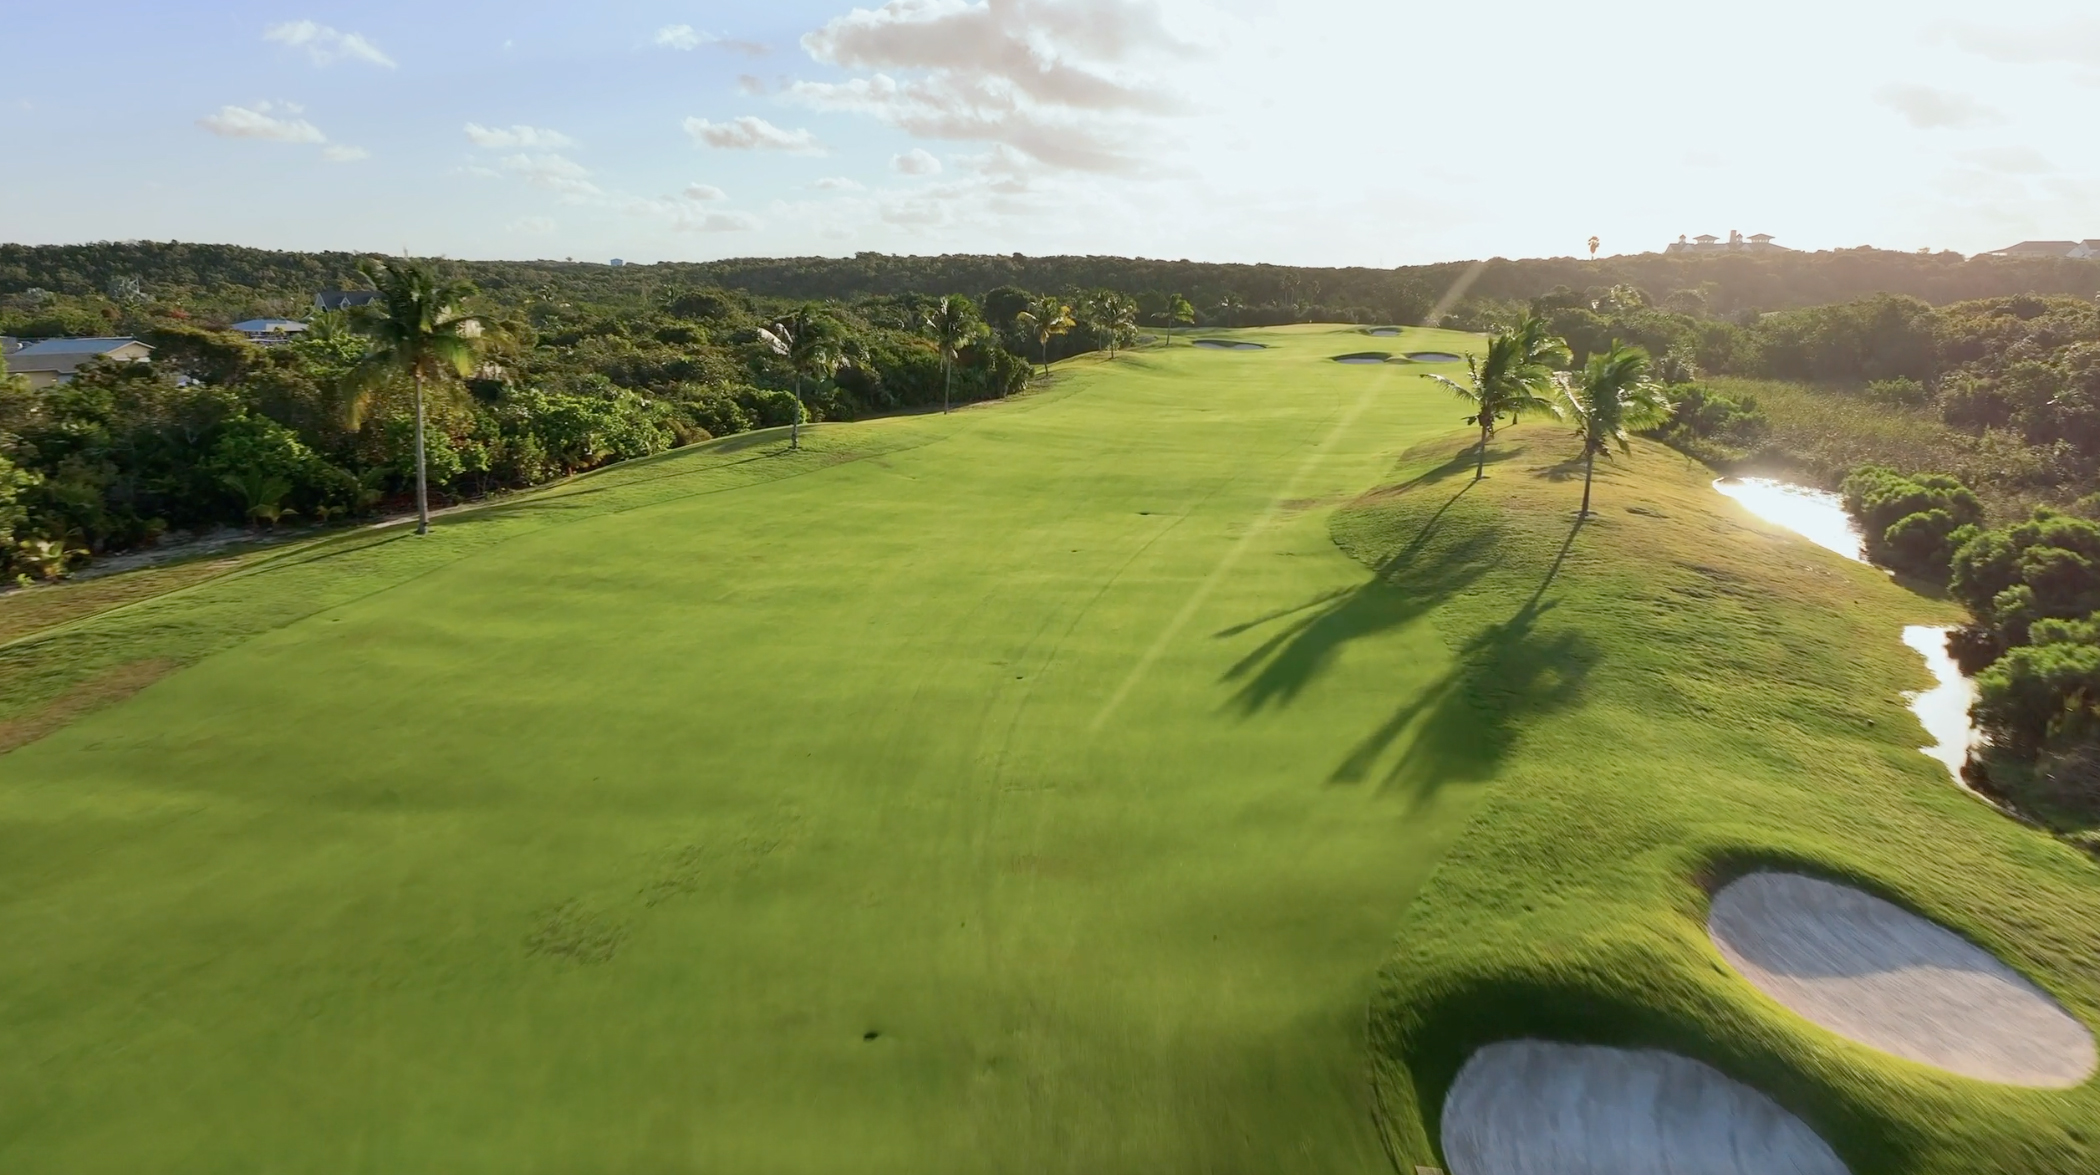 Aerial shot of Hole 14 from The Abaco Club golf course